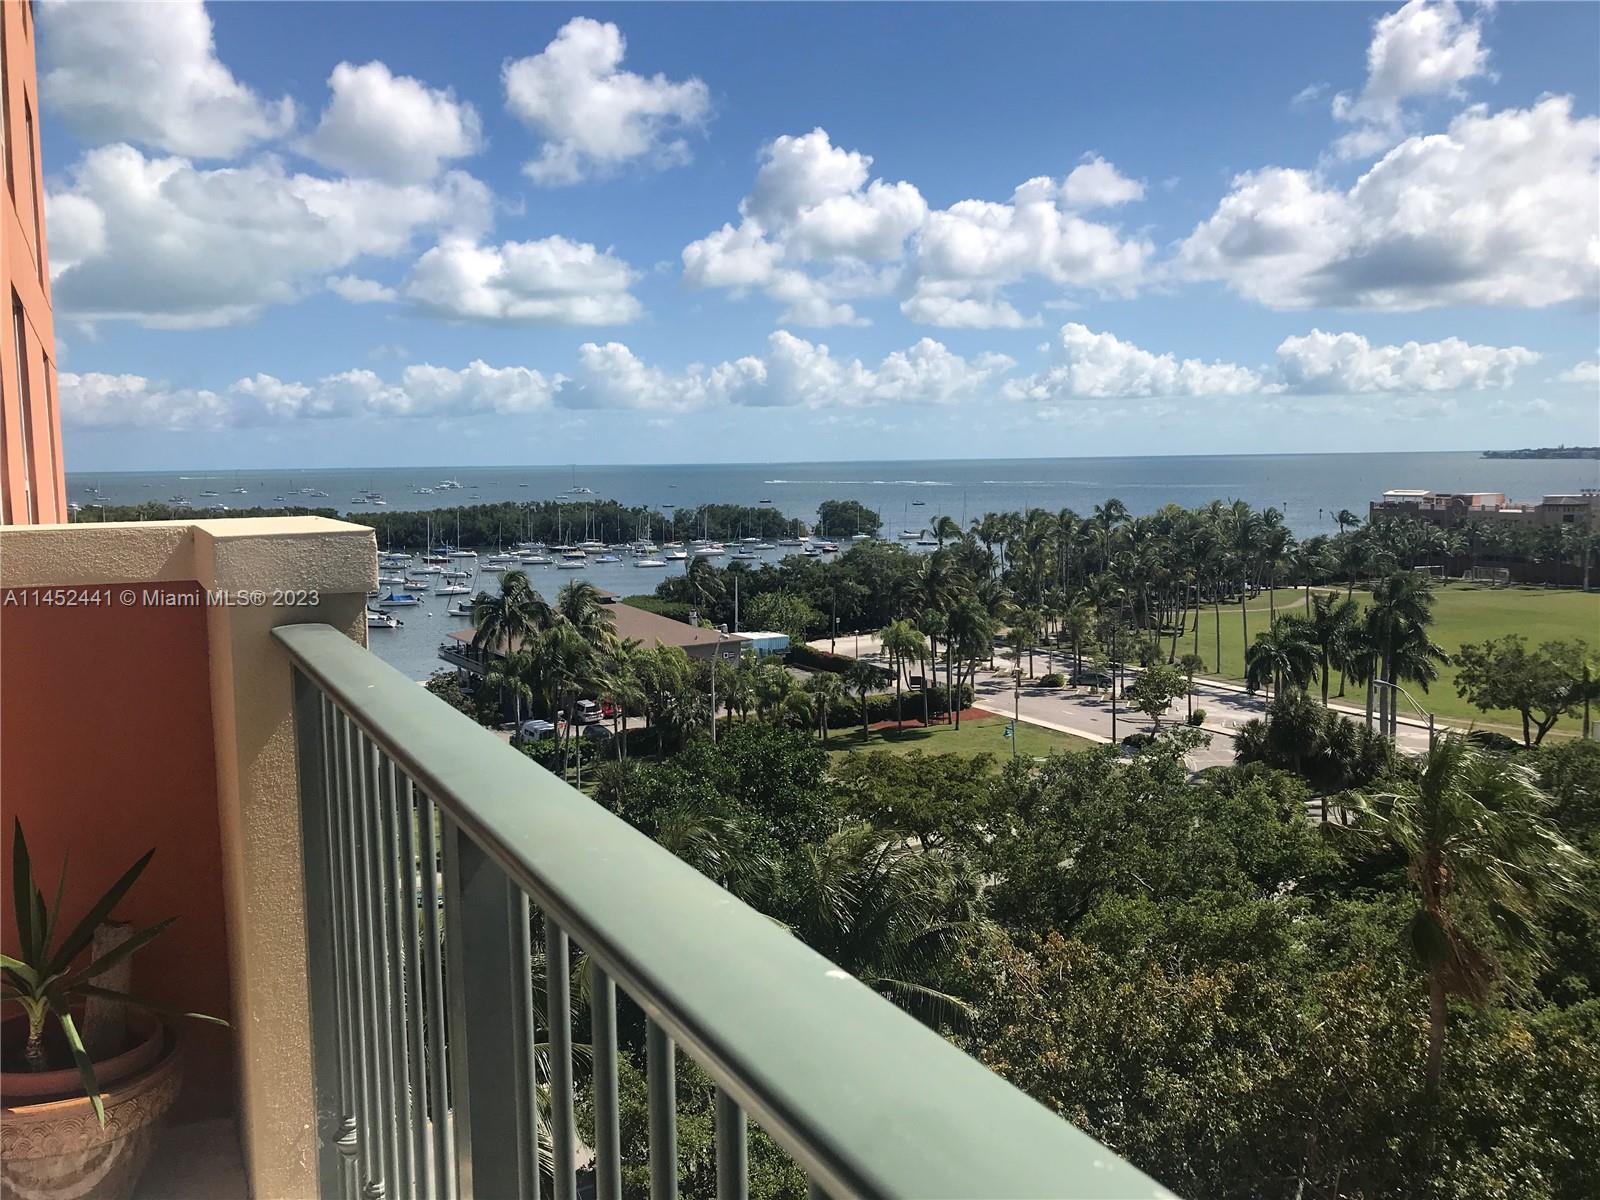 BEST Location In The Heart of Coconut Grove! Exquisite Fully Remodeled 1 Bed/1Full Bath. Breathtaking Water Views From Bedroom, Living Room & Private Balcony.  High End Finishes & Appliances; Electric Shades.  White Porcelain Floors Throughout The Unit Adding To The Openness & Cheerful Feeling of the Unit.  24-Hr Concierge, 1 Assigned Pking + Valet Parking + Security.  JUST STETPS  From Fine and Casual Dining, Fedex, Fresh Market, Shops, Marina, Parks, Coffee Shops.  No pets allowed per Building rules ONLY Service Dogs.